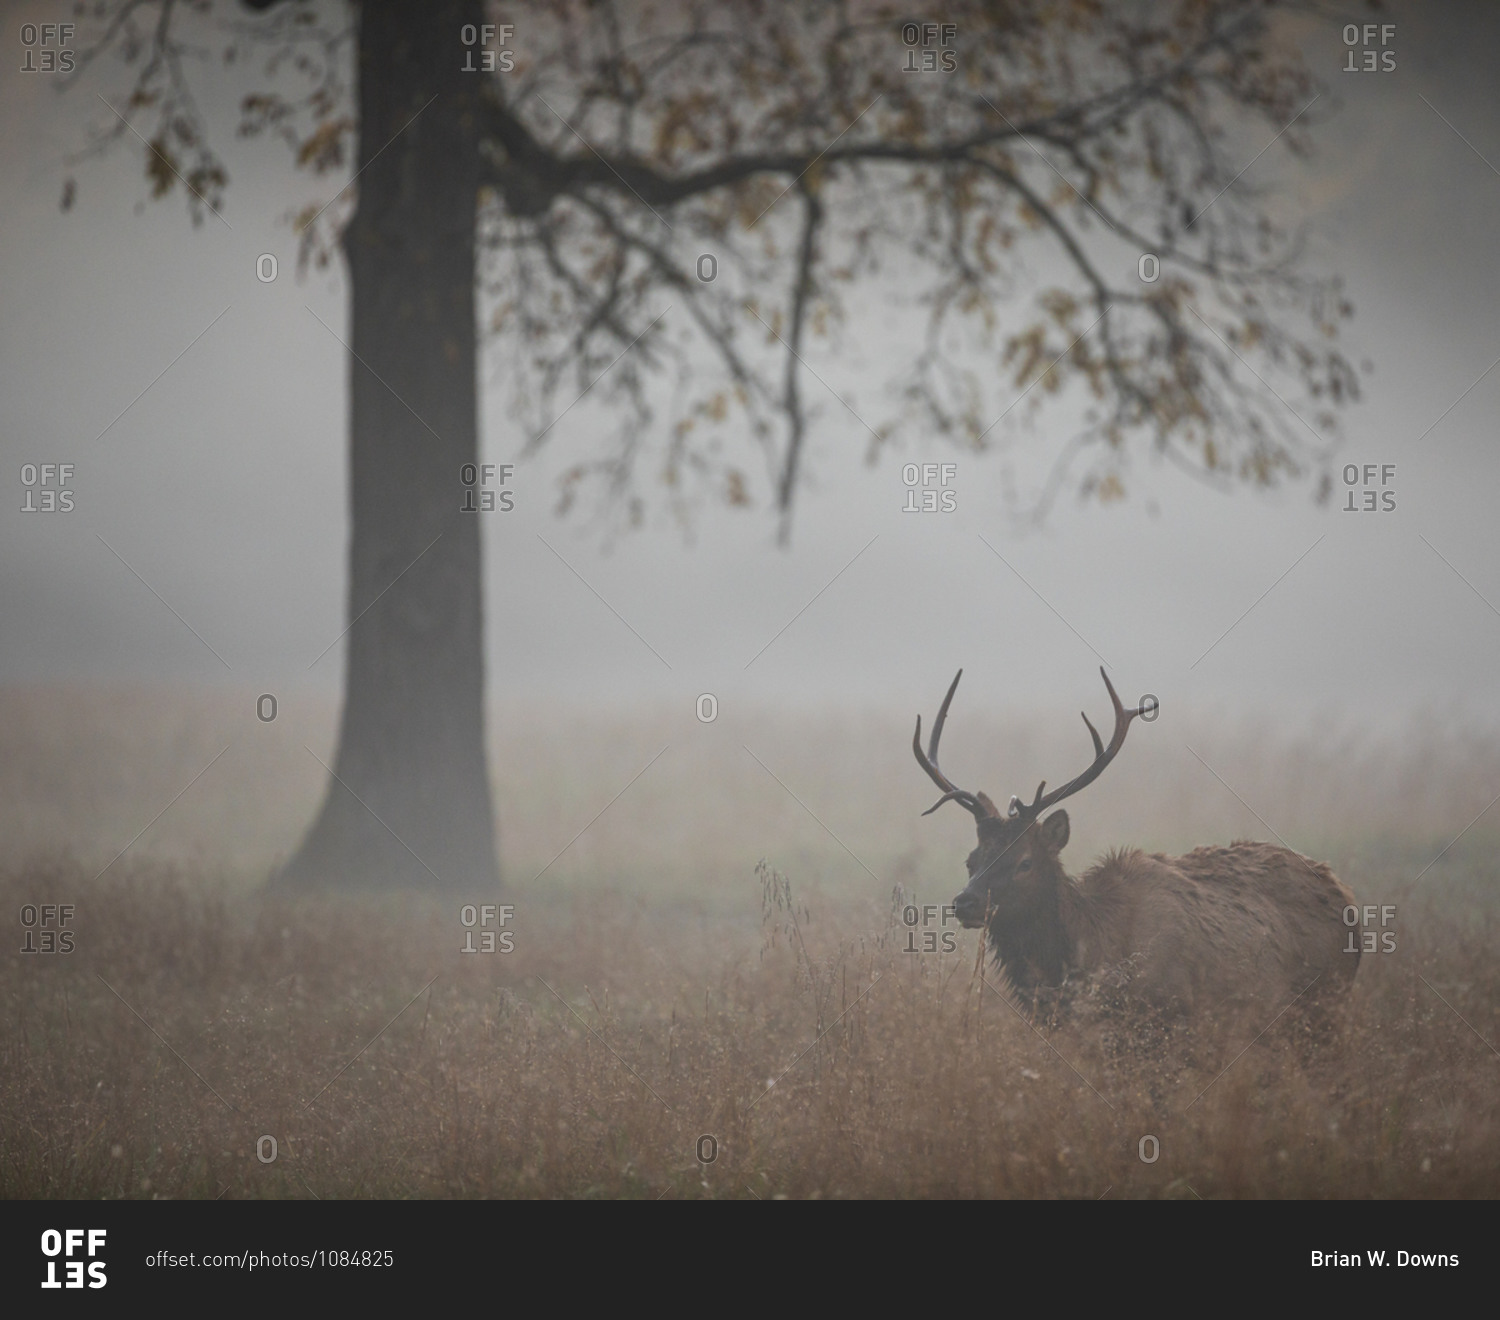 Foggy field with a large bull elk walking in Great Smoky Mountains National Park, Cataloochee, North Carolina